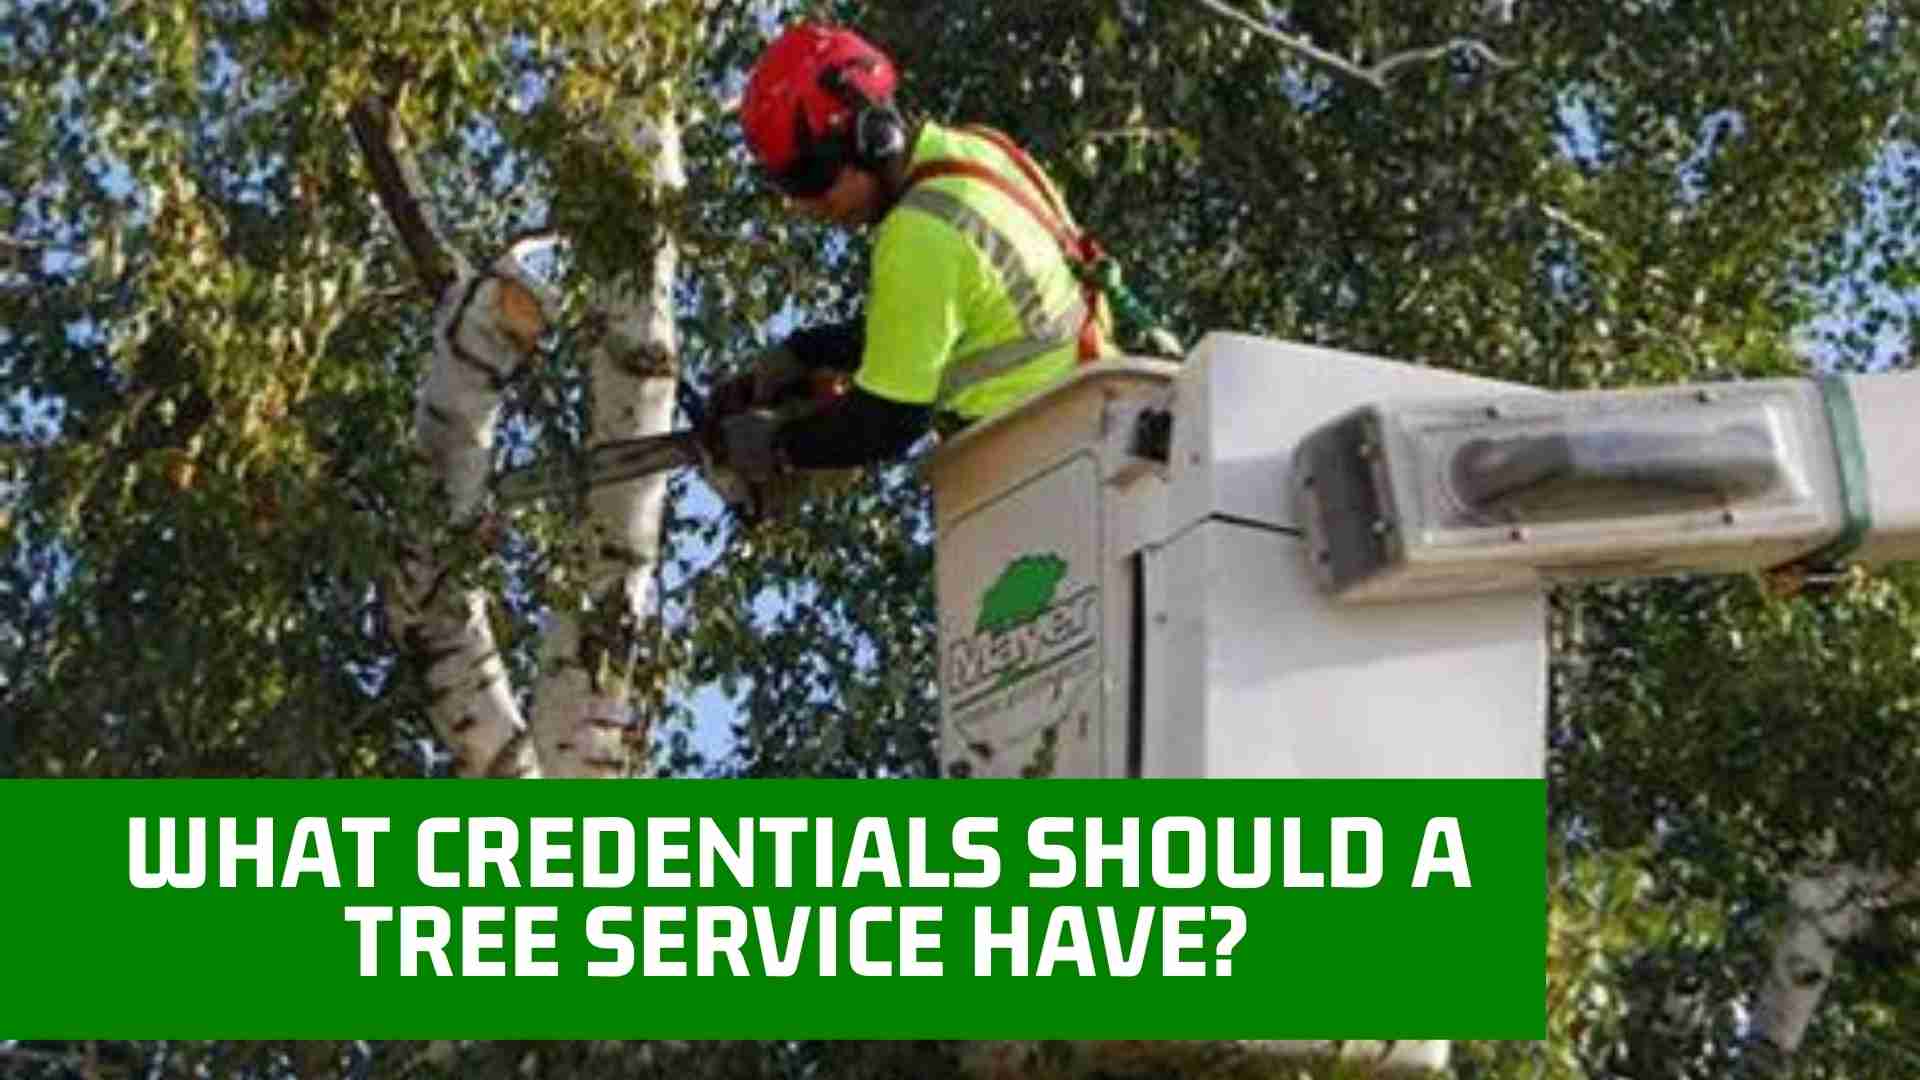 What Credentials Should a Tree Service Have